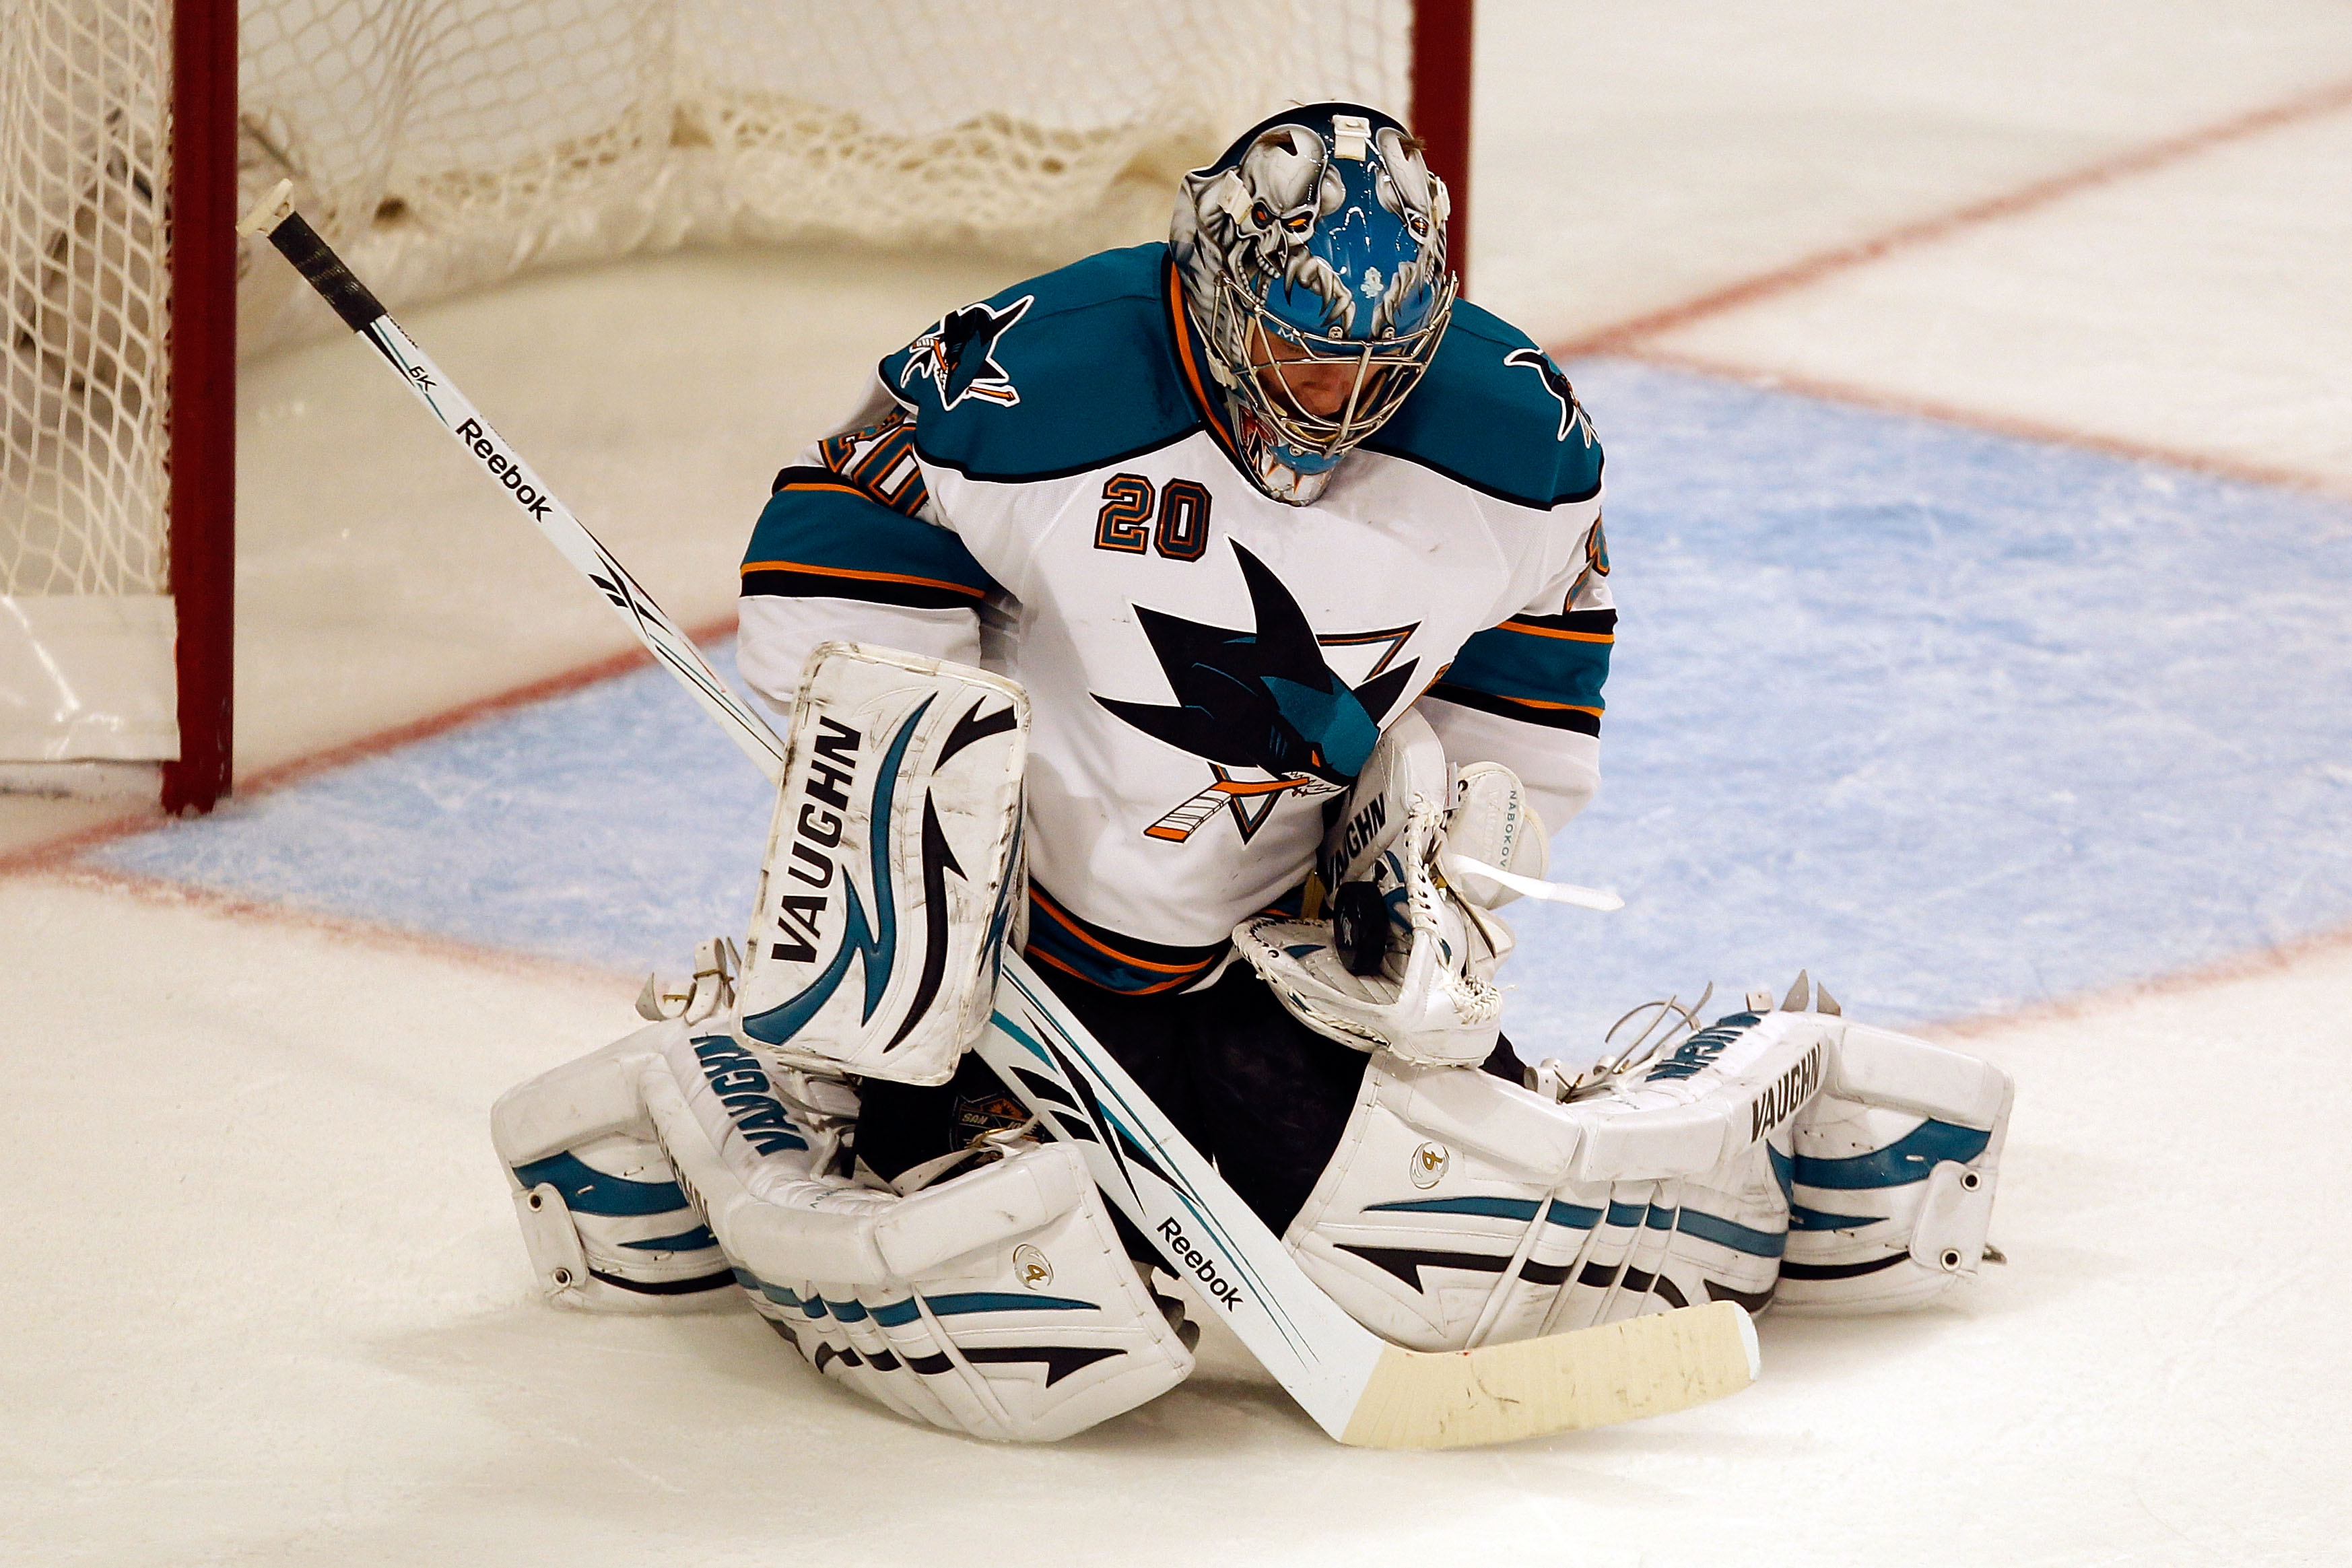 CHICAGO - MAY 23:  Goaltender Evgeni Nabokov #20 of the San Jose Sharks makes a second period save while taking on the Chicago Blackhawks in Game Four of the Western Conference Finals during the 2010 NHL Stanley Cup Playoffs at the United Center on May 23